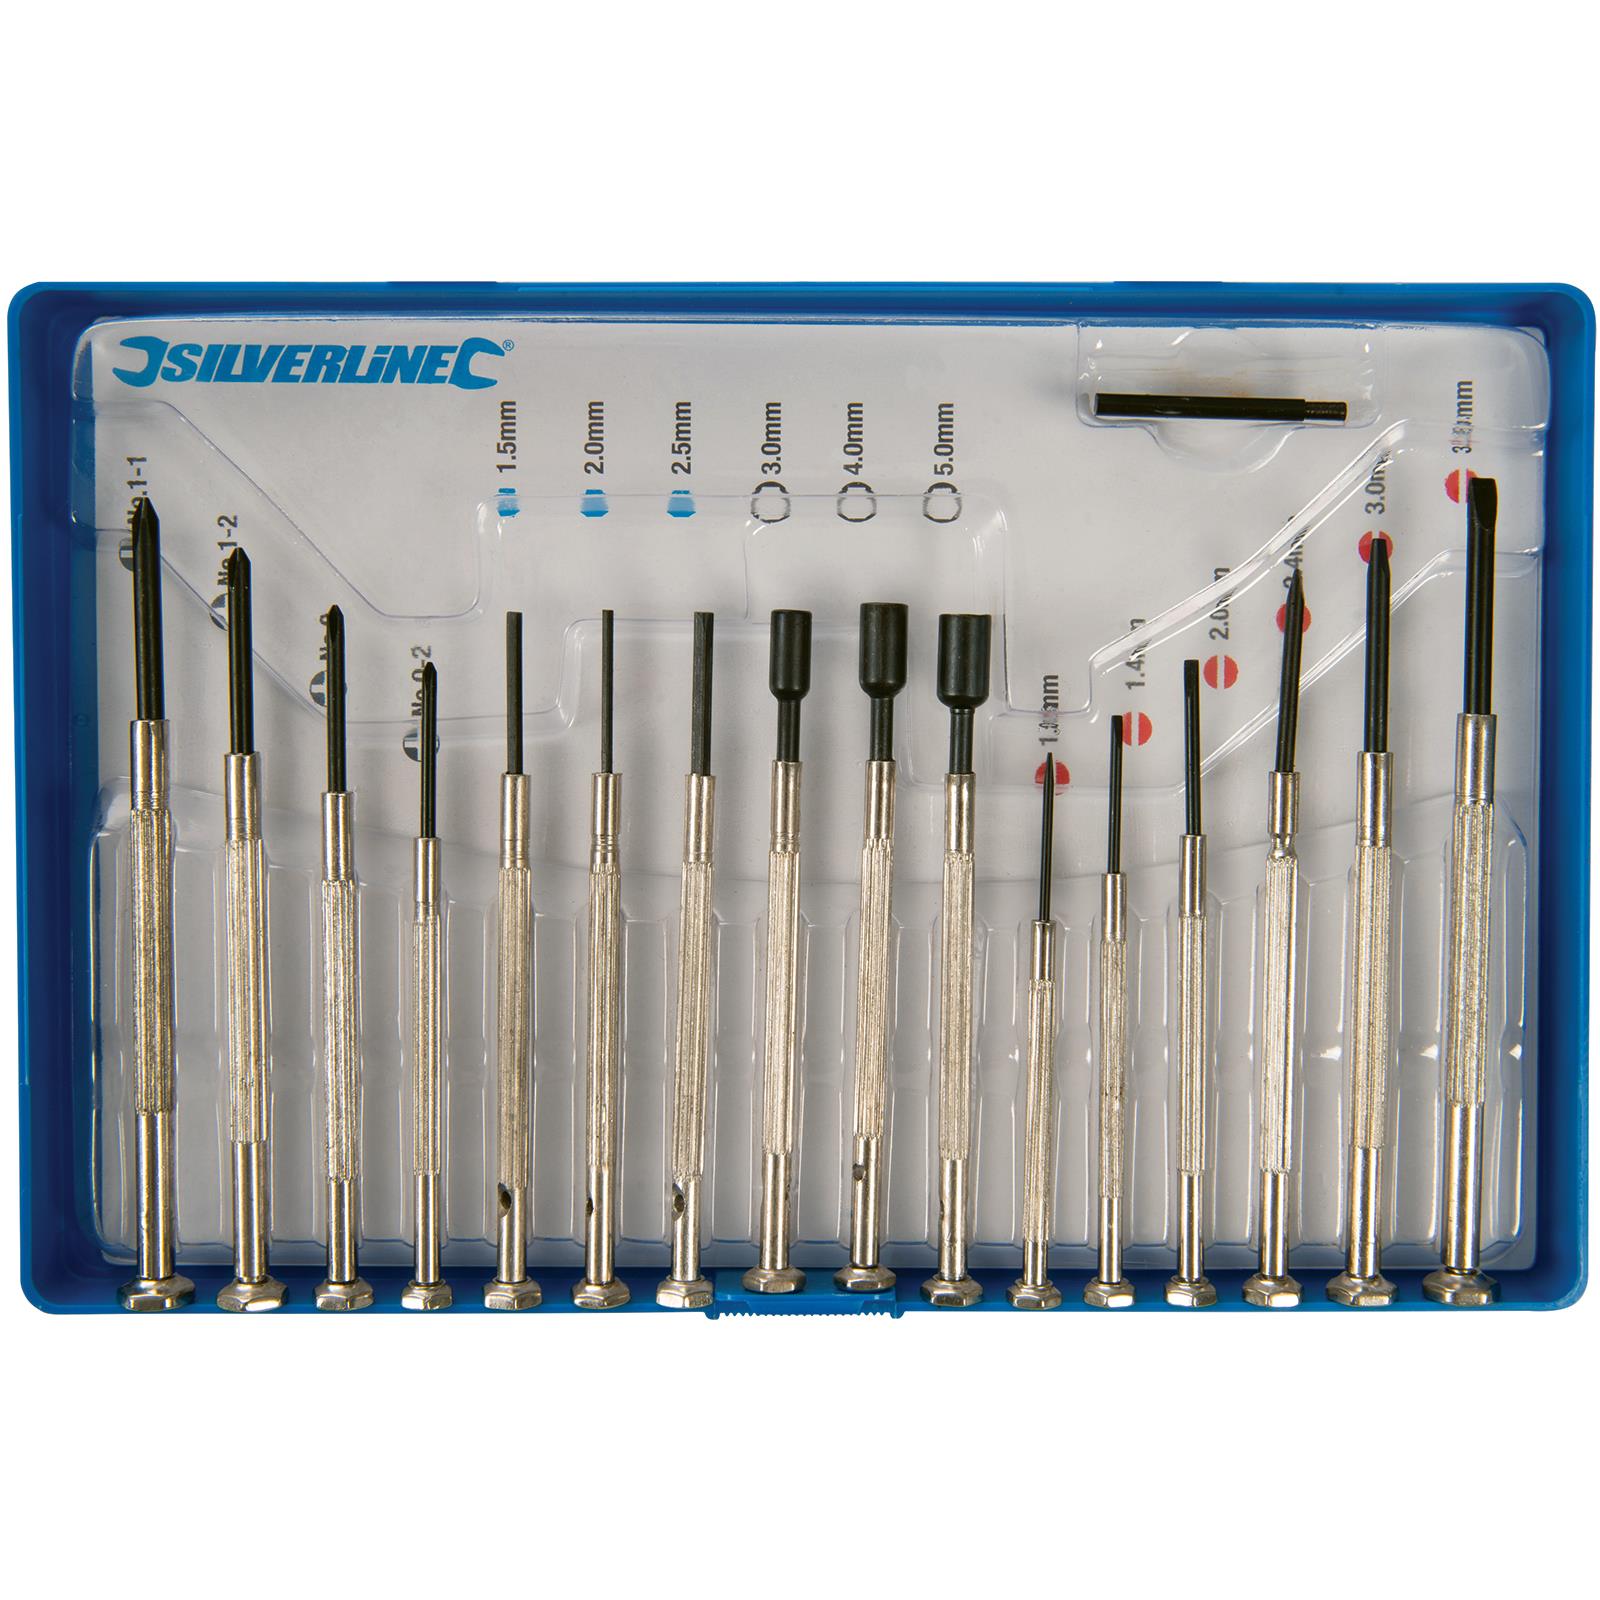 Silverline 16 Piece Jewellers Screwdriver Set Phillips Slotted Hex Nut Driver